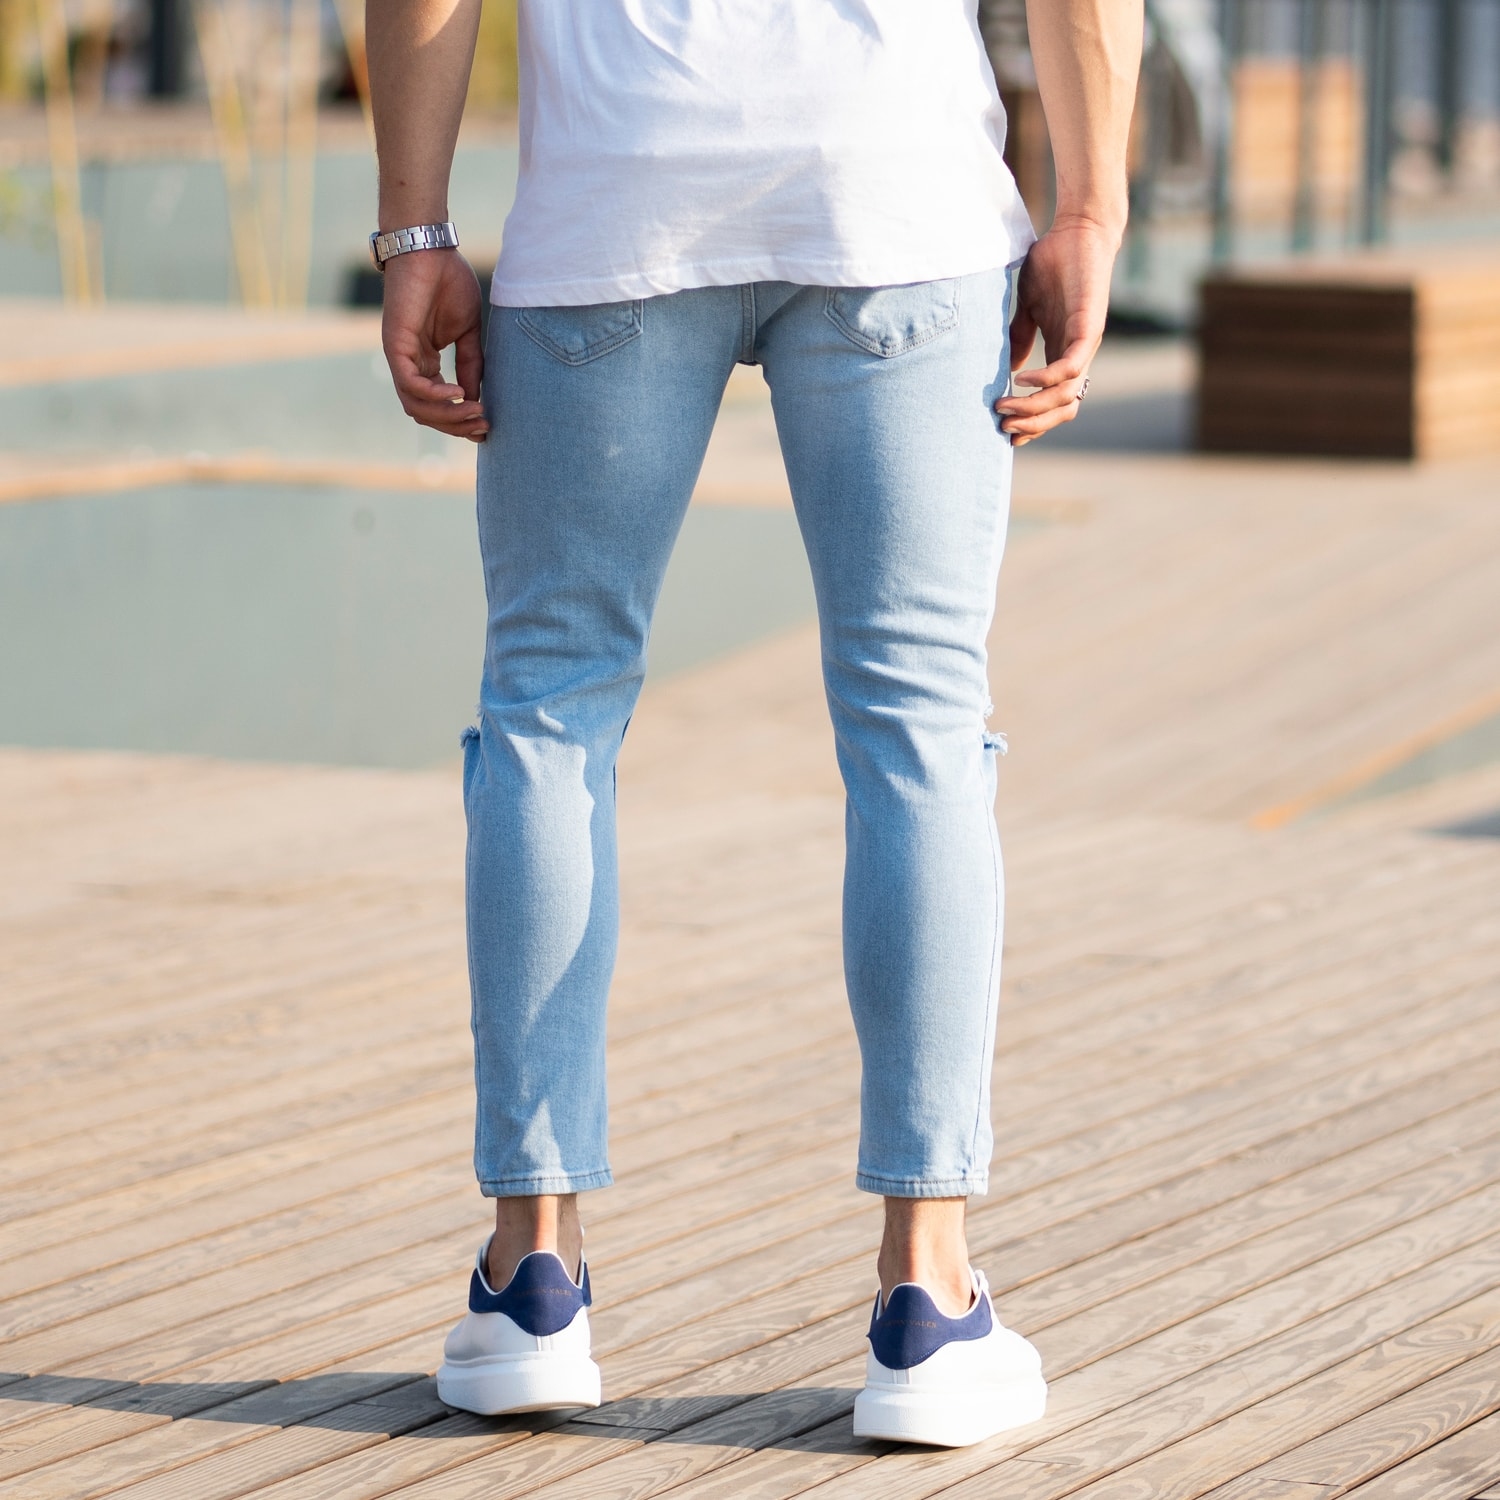 Men's Light-Blue Jeans With Rips